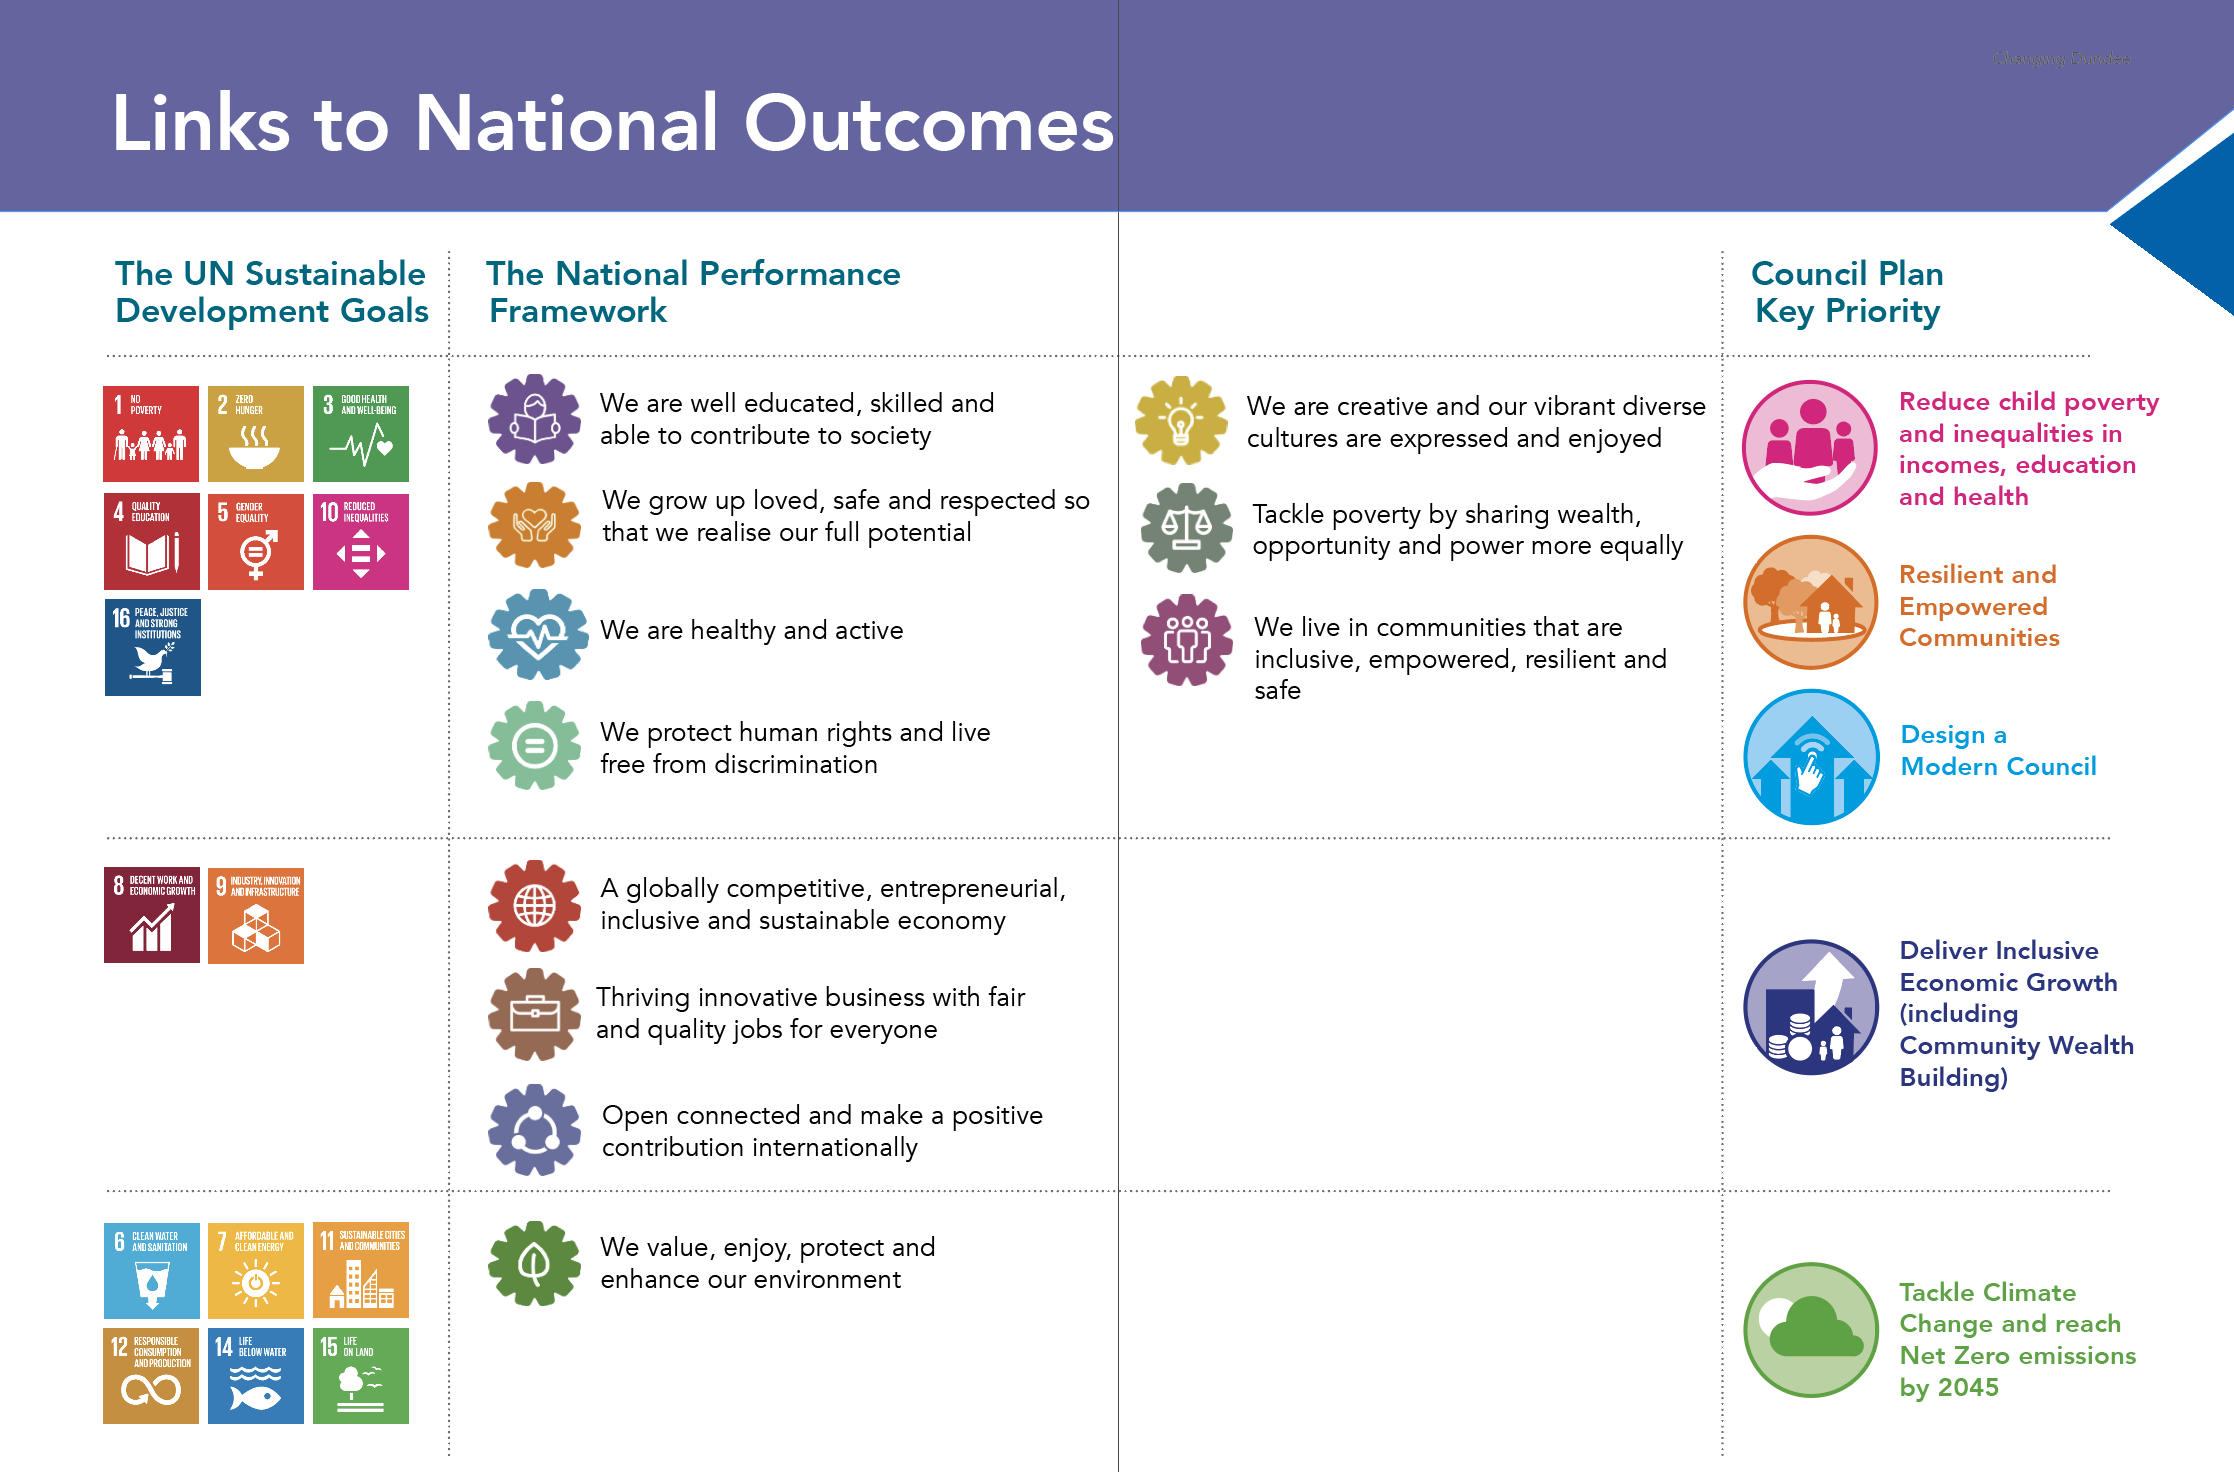 The image shows the Council Plan priorities and how they connect to The National Performance Framework and the UN Sustainable Development Goals 